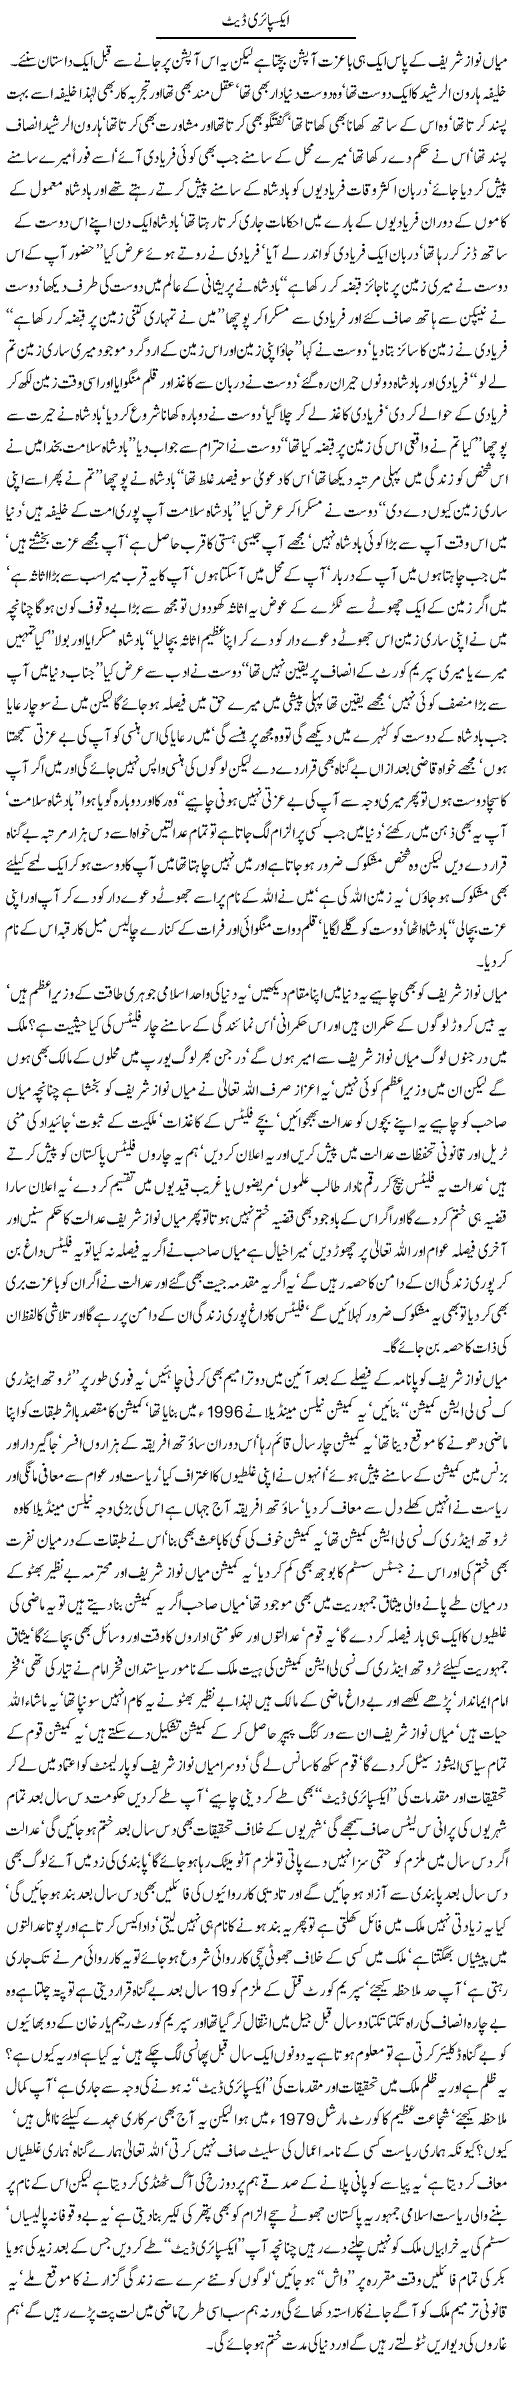 expiry-date-by-javed-chaudhry